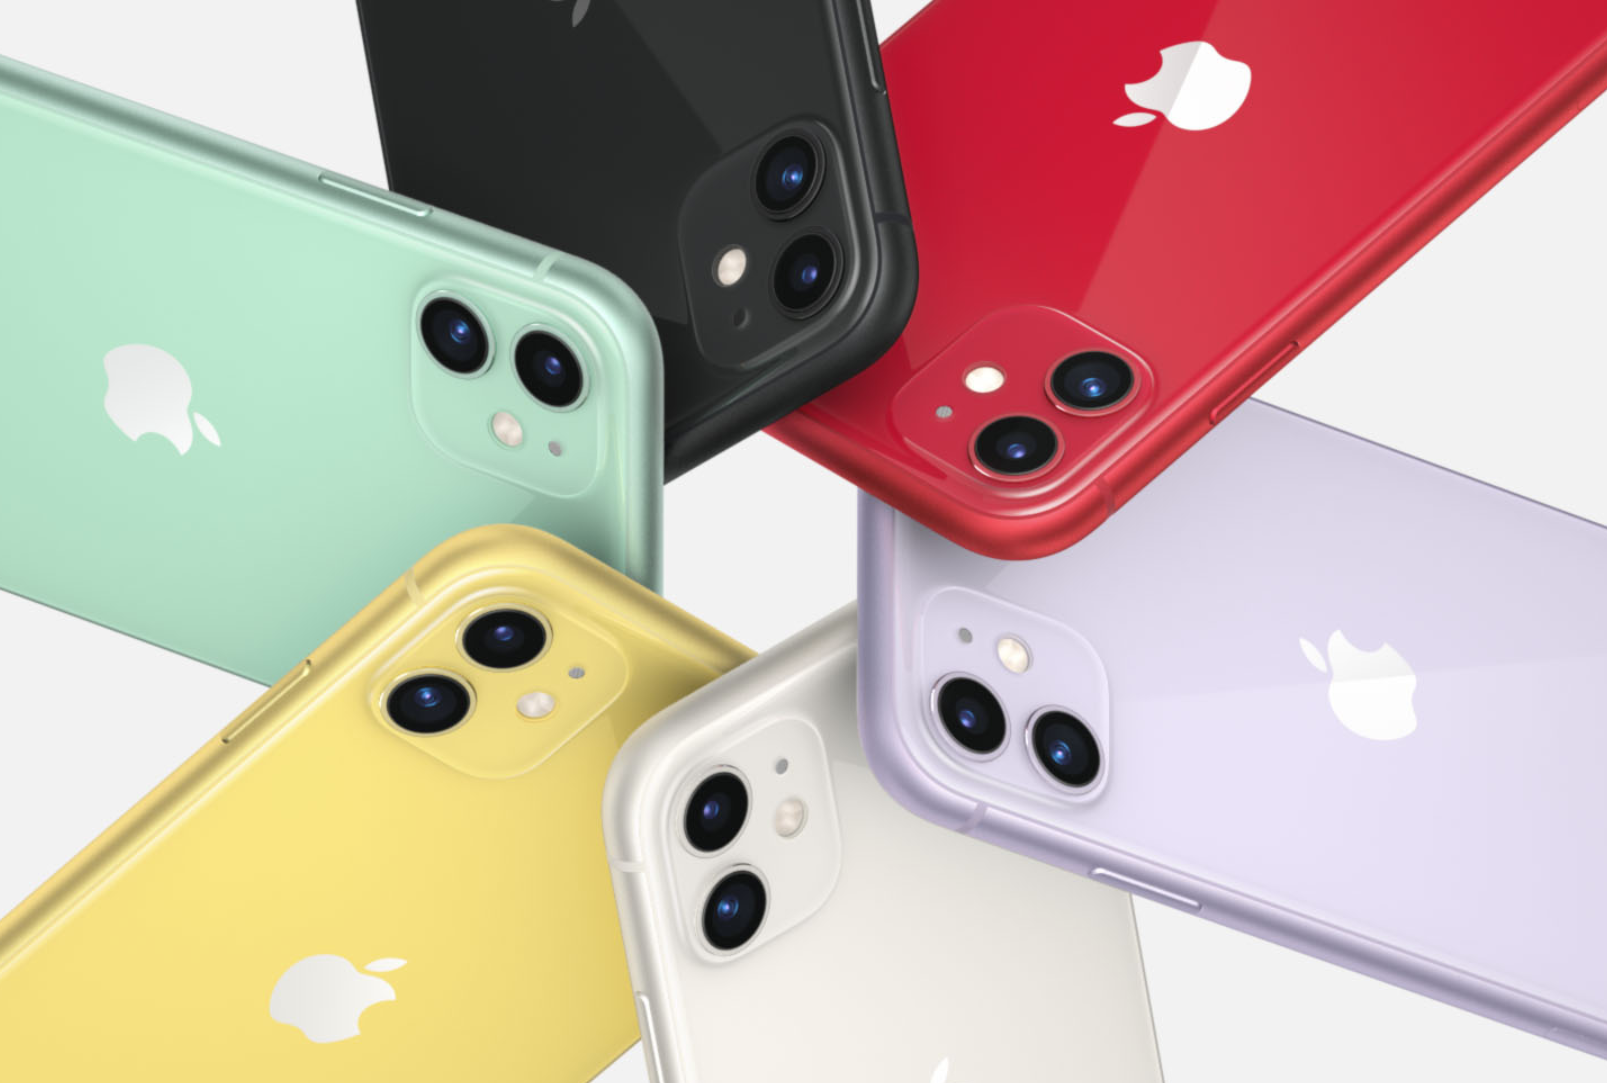 All iPhone 11 colors - Apple announces iPhone 11, iPhone 11 Pro and 11 Pro Max